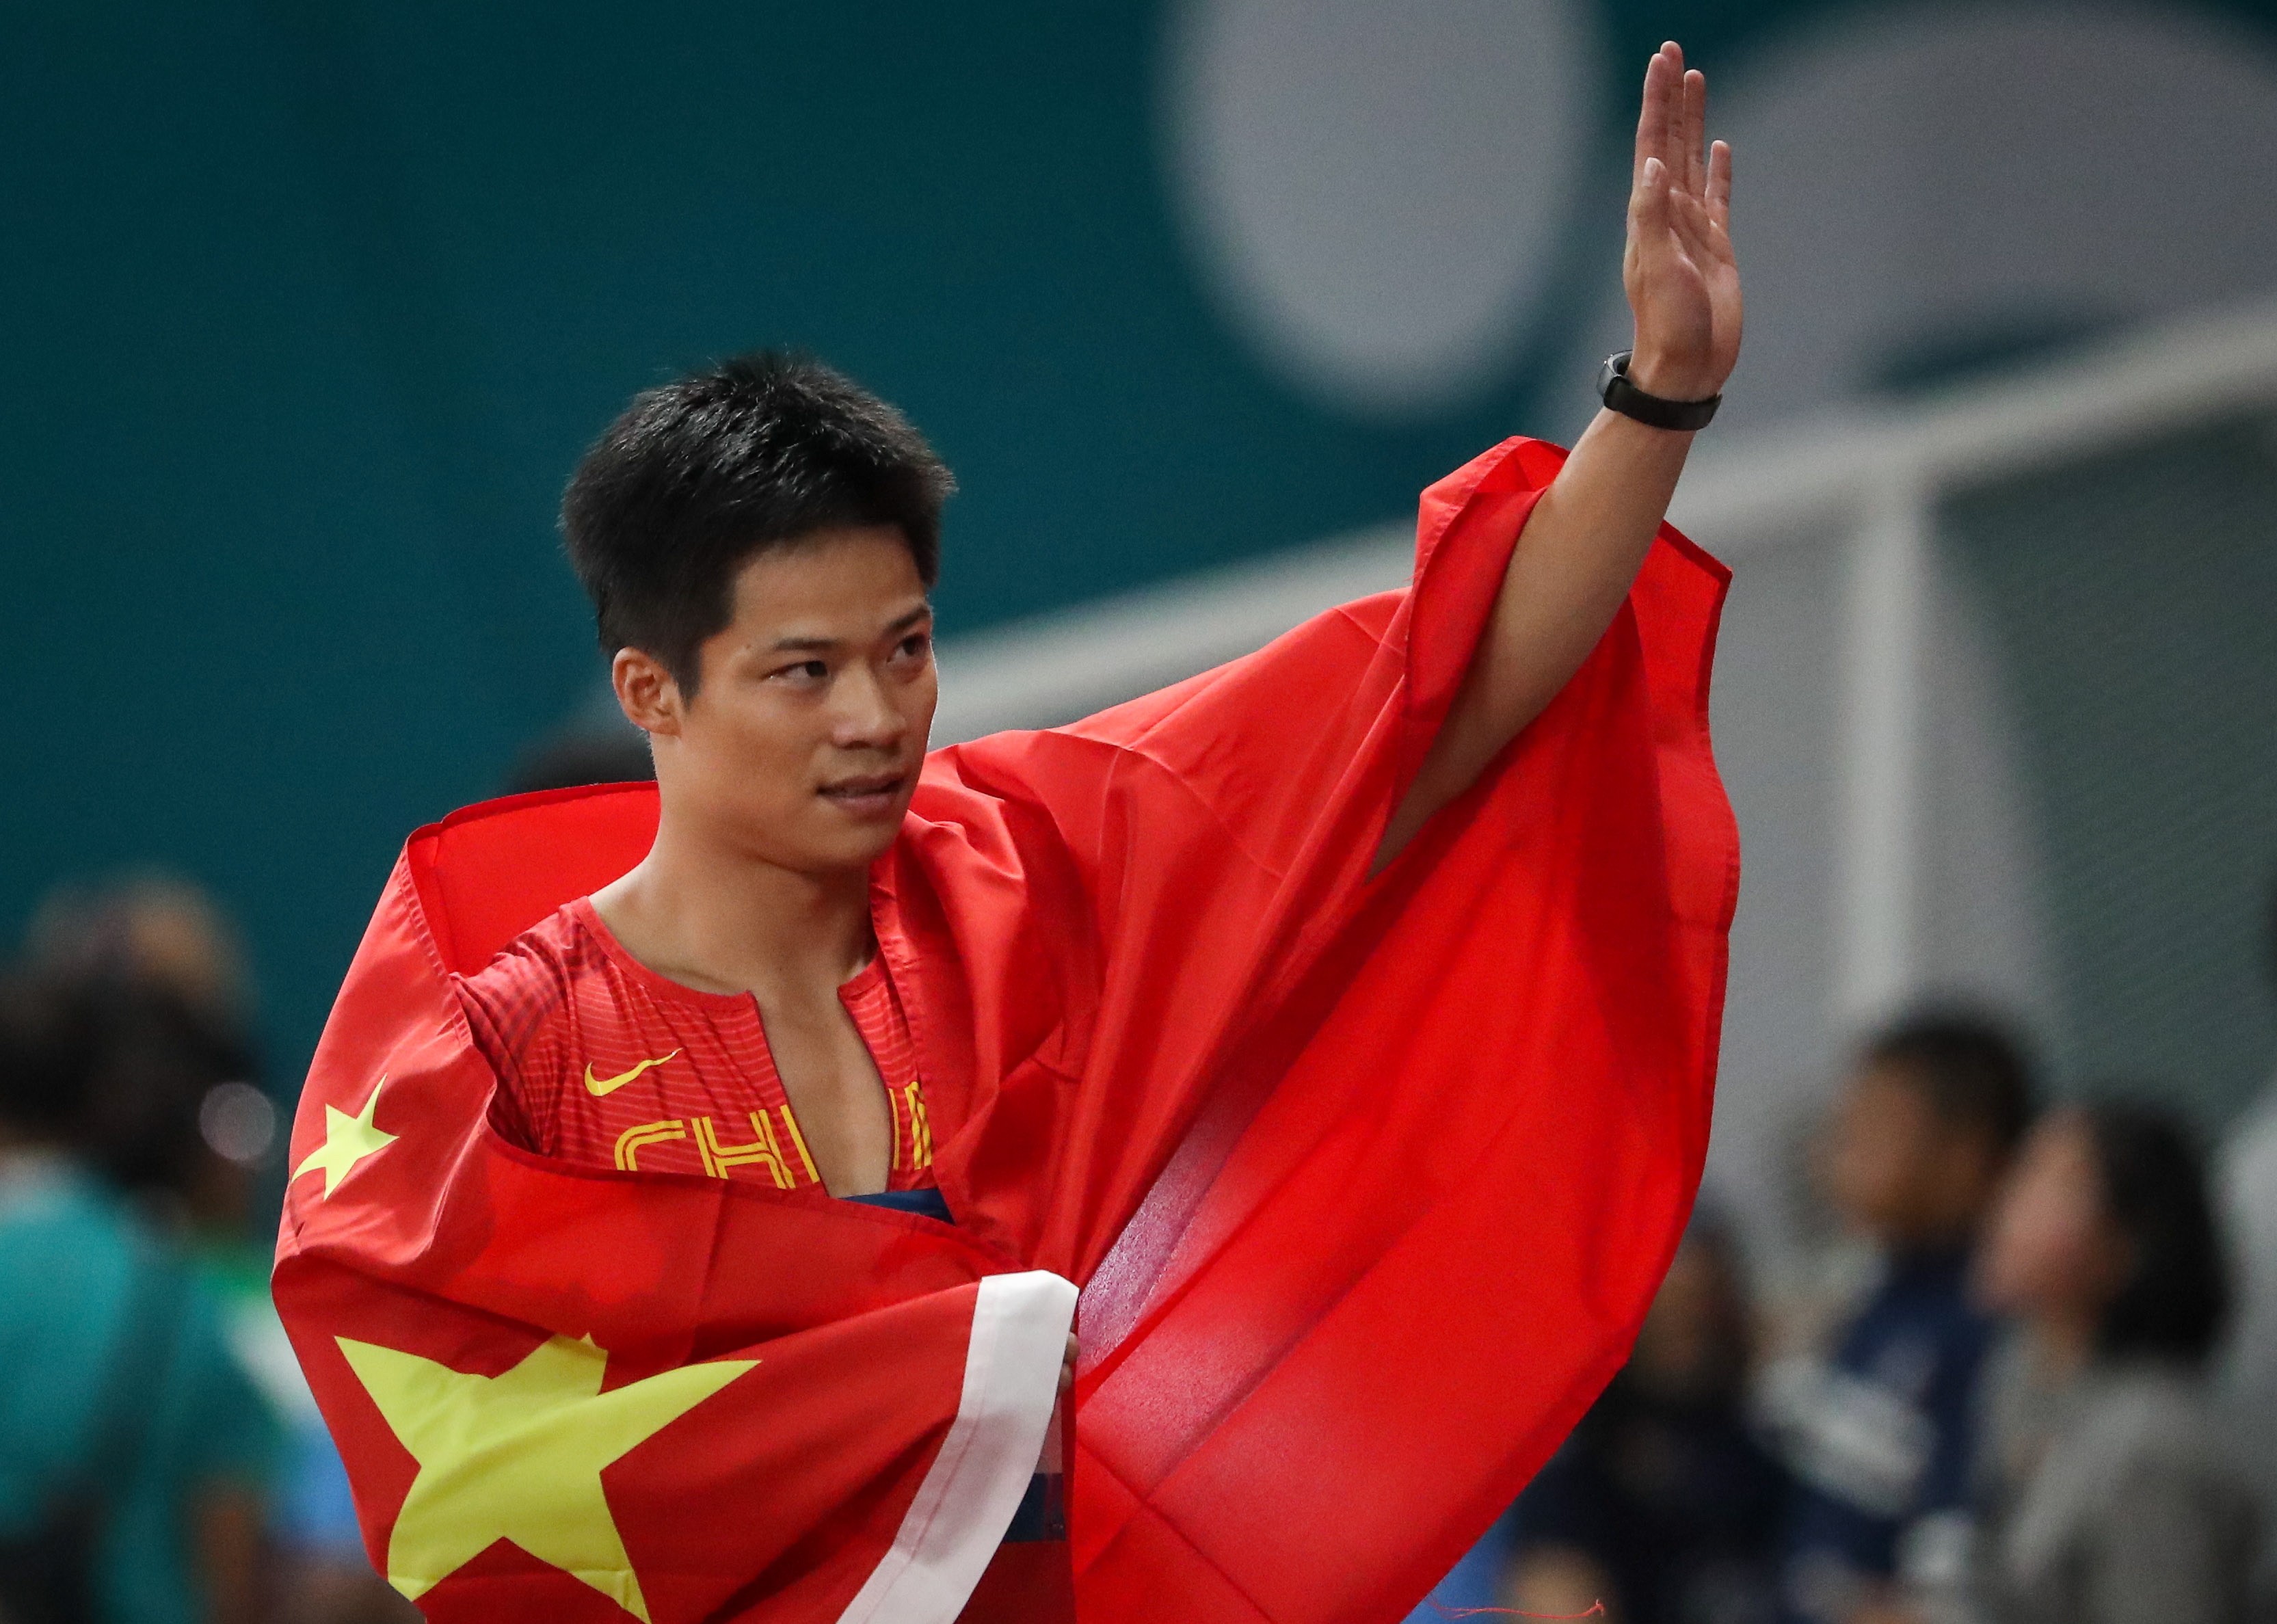 Su Bingtian after finishing first in the men’s 100m finals at the Asian Games. Photo: EPA